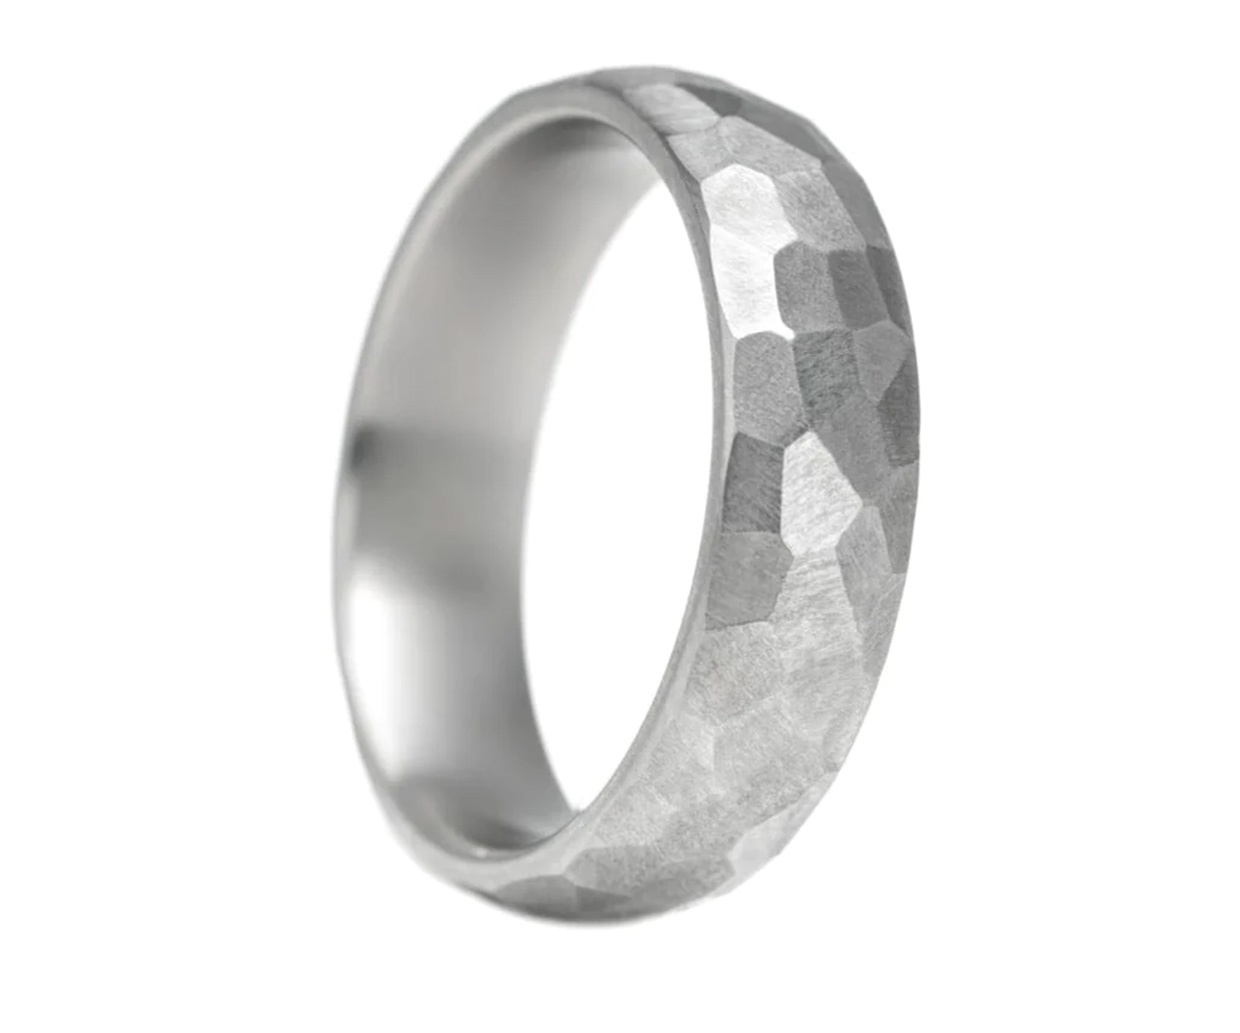 The Charles Faceted Titanium Ring